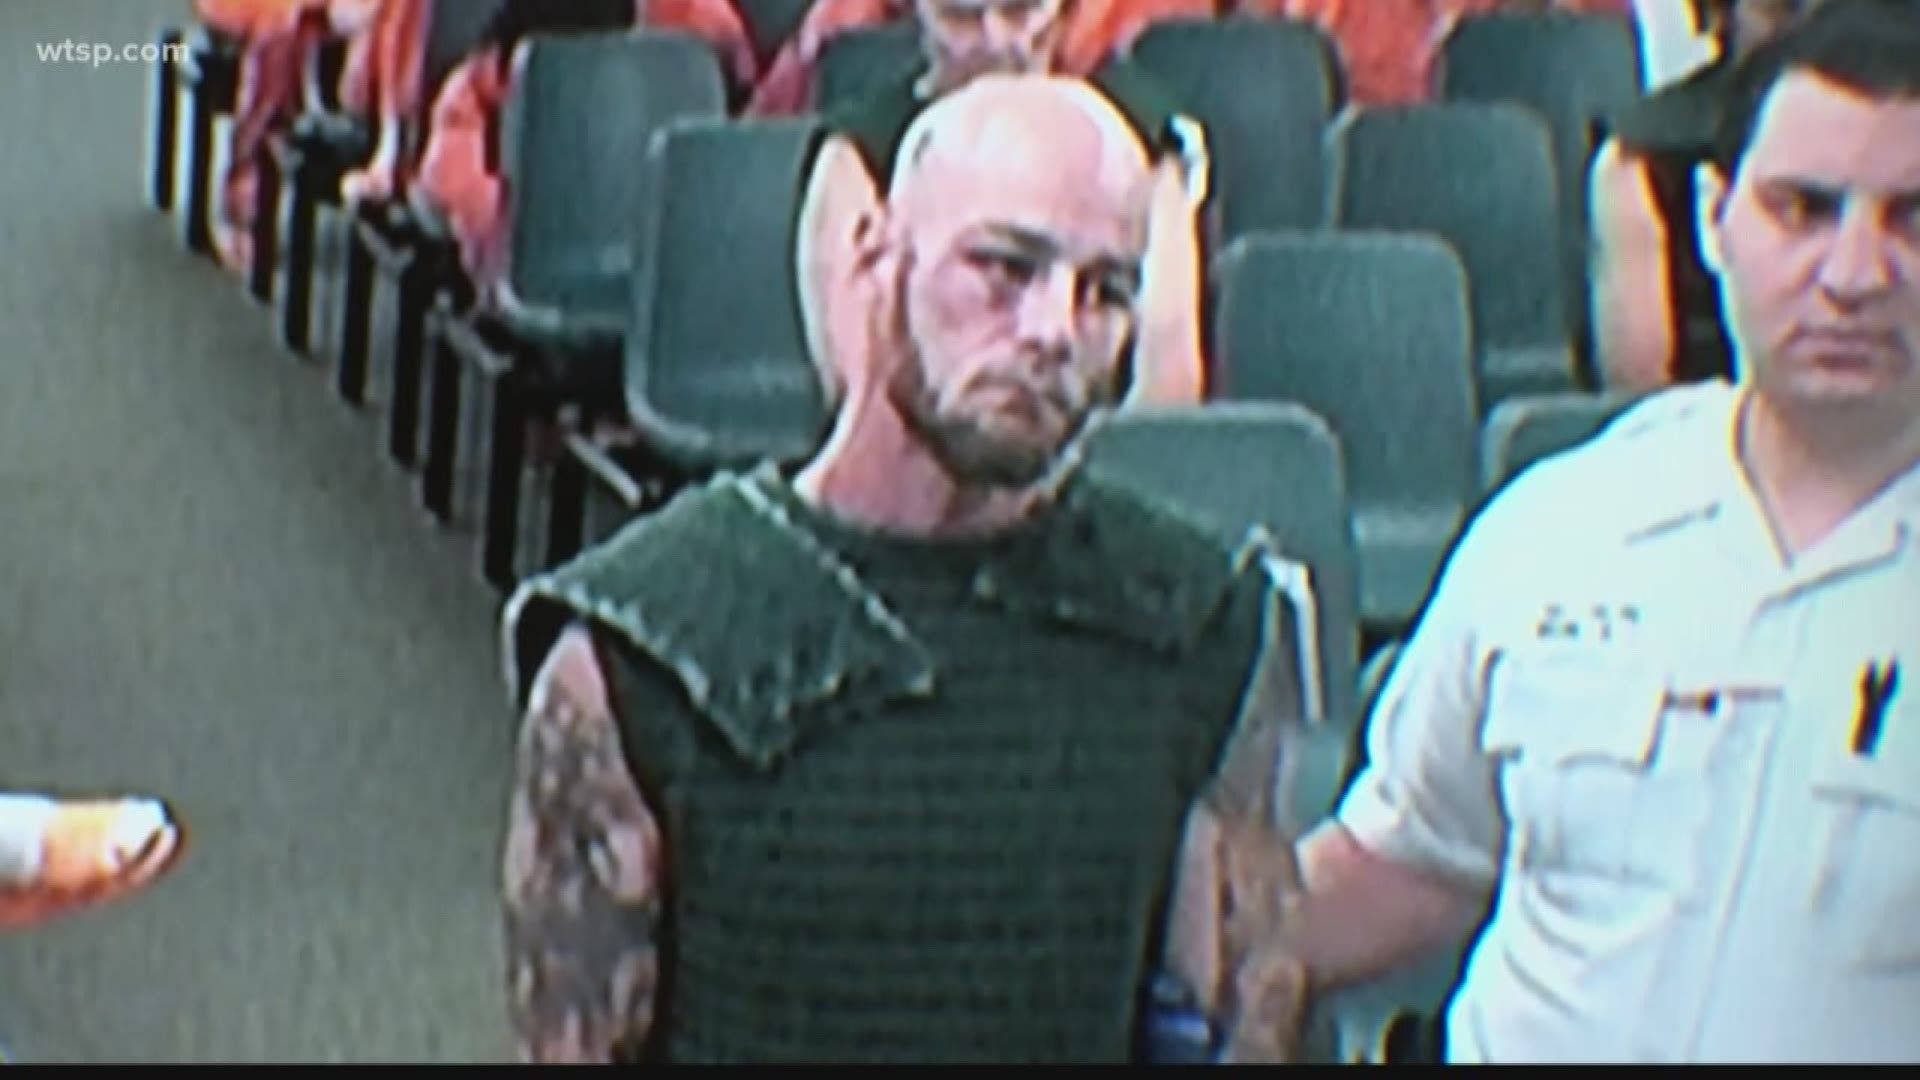 The man accused of robbing a bank, carjacking and killing a man in Valrico attempted to end his life in jail, the sheriff's office said.

The Hillsborough County Sheriff's Office said James Hanson Jr., 39, managed to sneak a towel into a recreation area and hanged himself. The sheriff's office said a deputy saw Hanson's attempt to end his life and intervened.

The deputy performed lifesaving CPR on Hanson and called emergency responders.